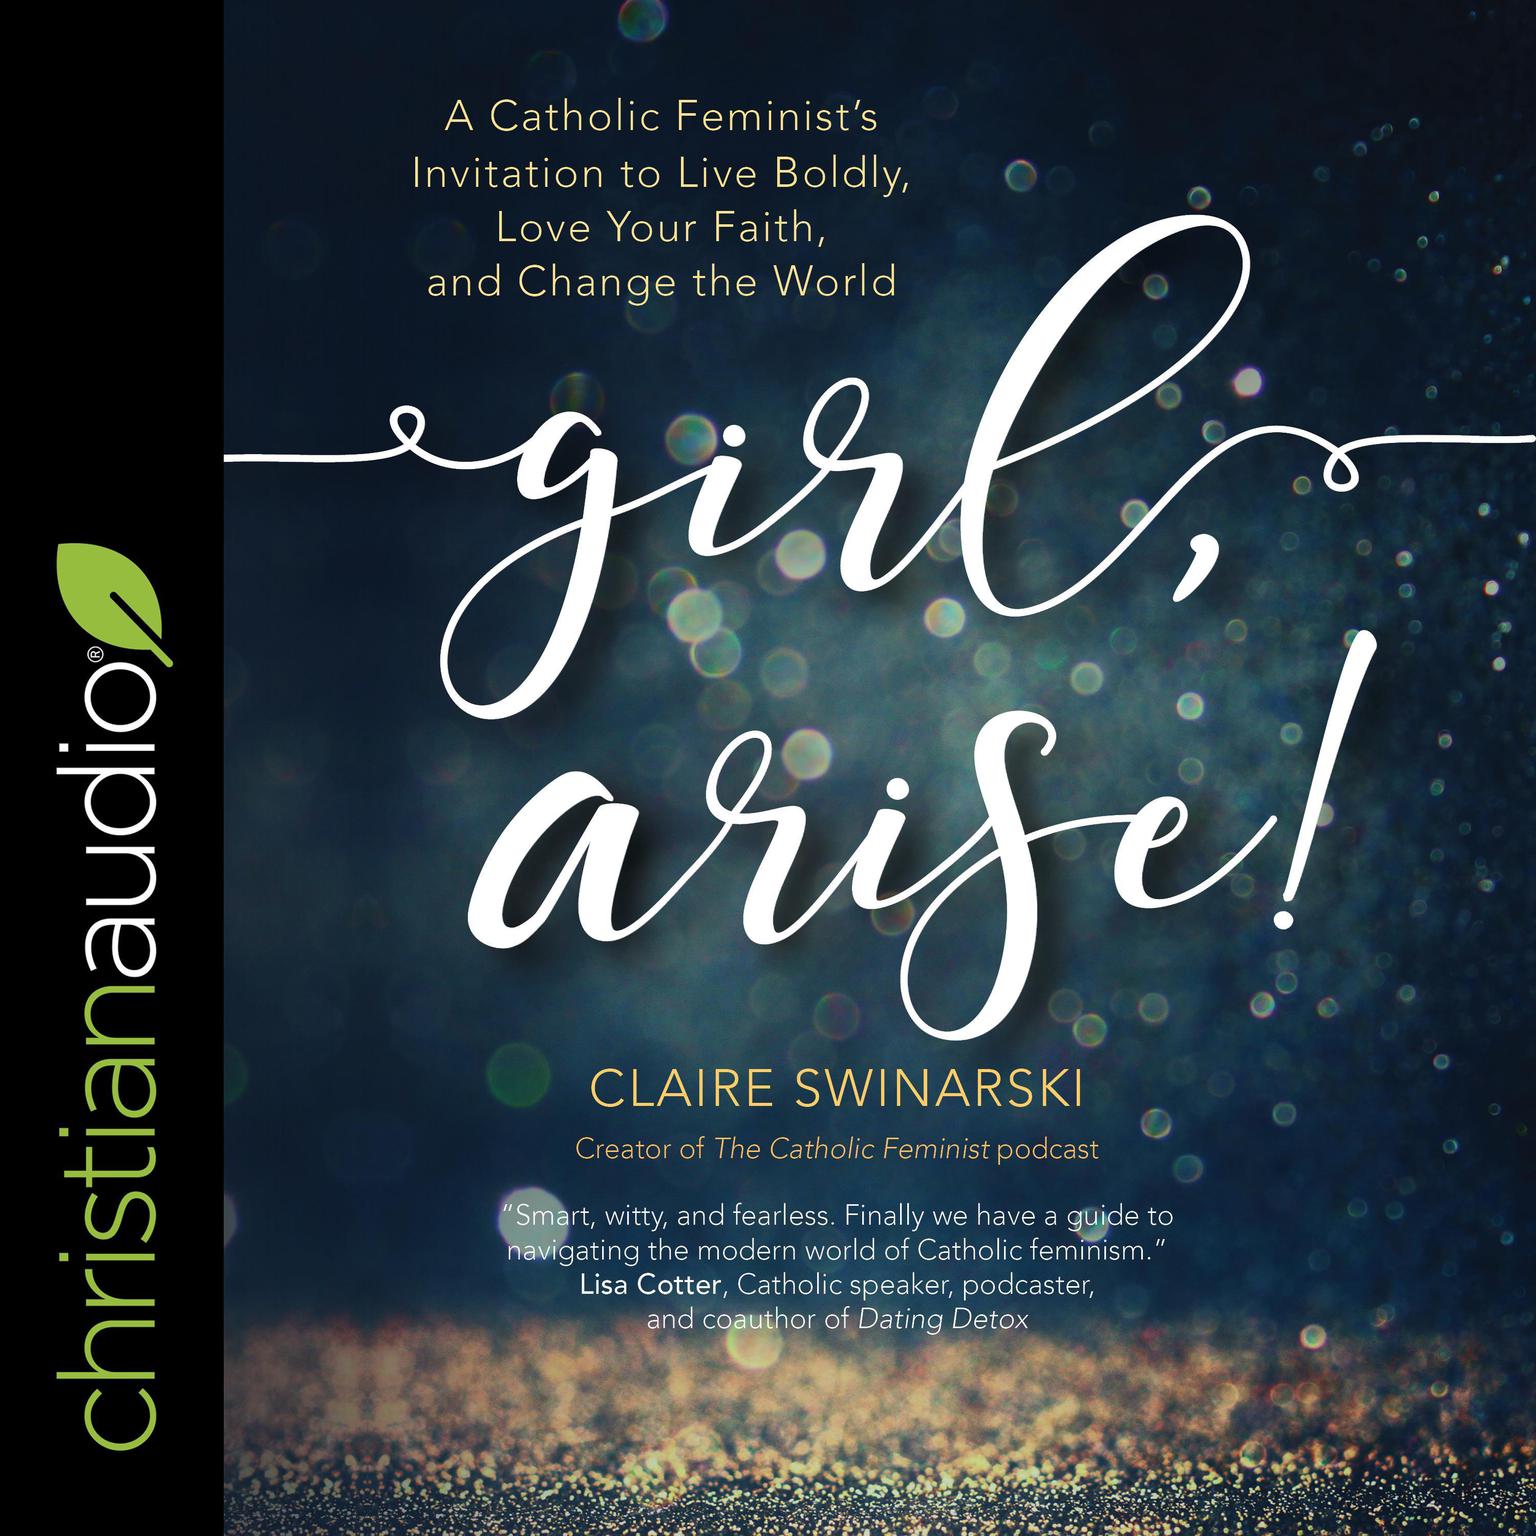 Girl, Arise!: A Catholic Feminists Invitation to Live Boldly, Love Your Faith, and Change the World Audiobook, by Claire Swinarski